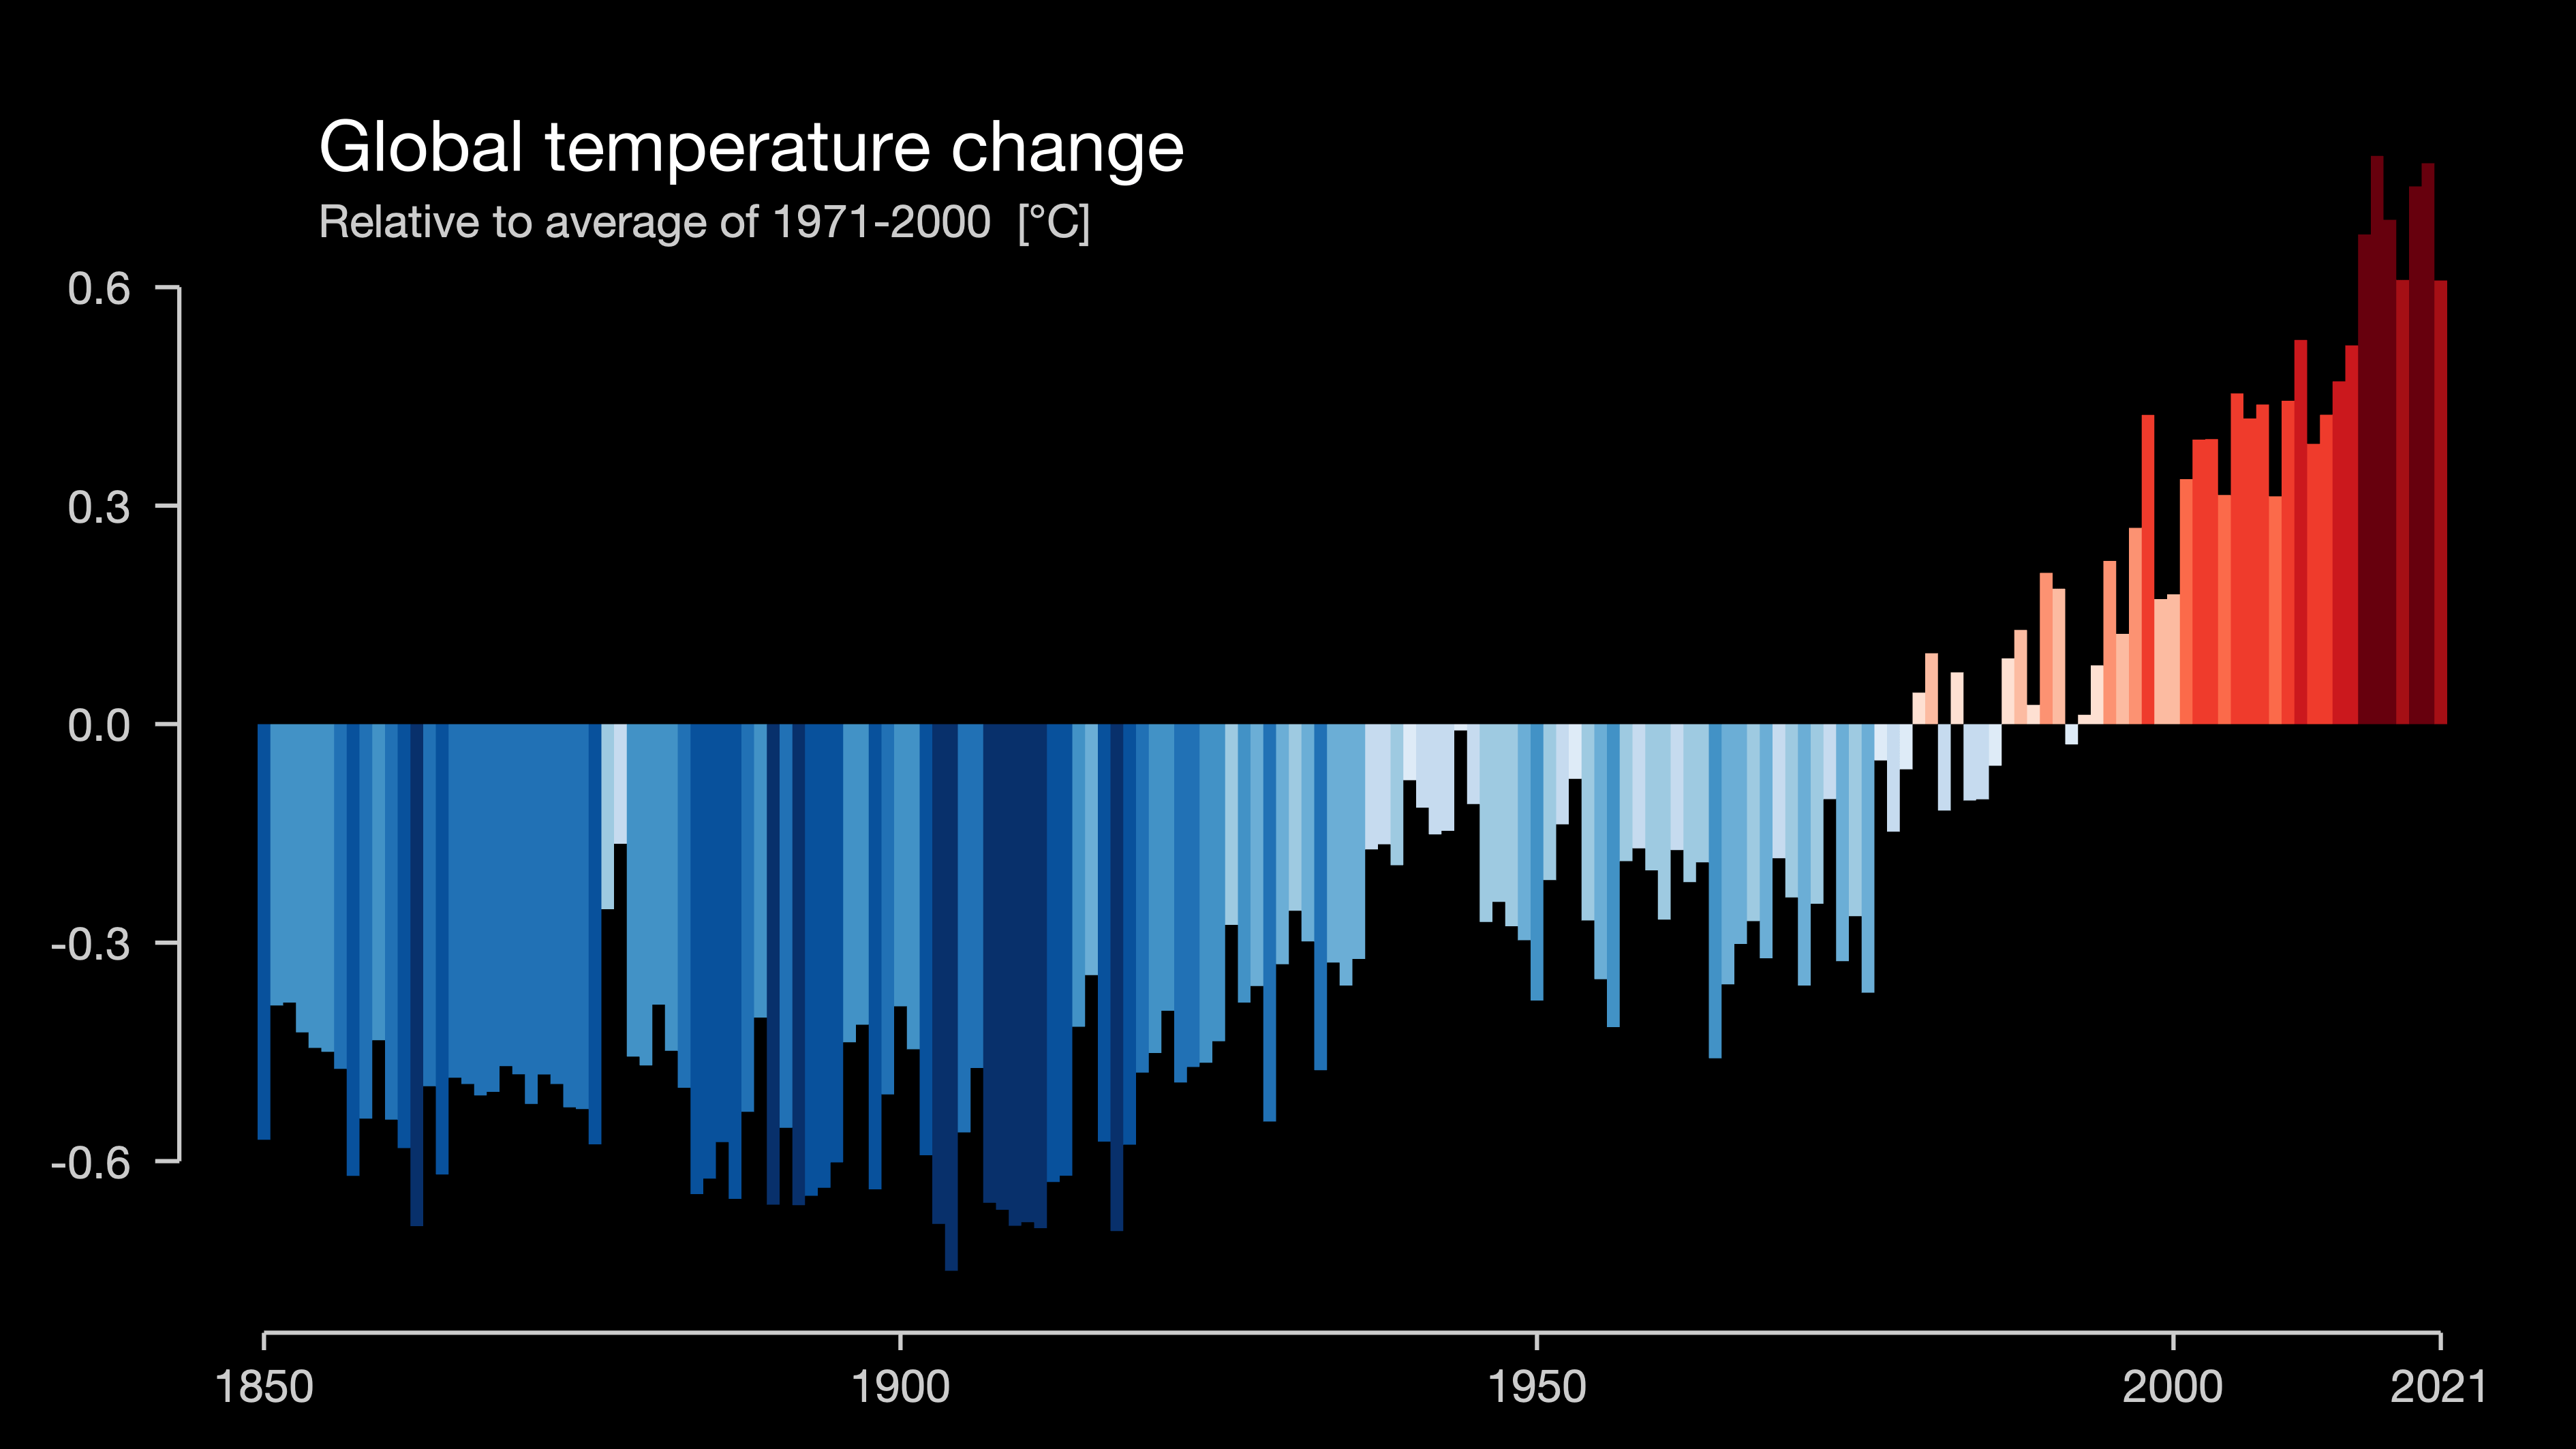 Increase in global temperatures since 1850